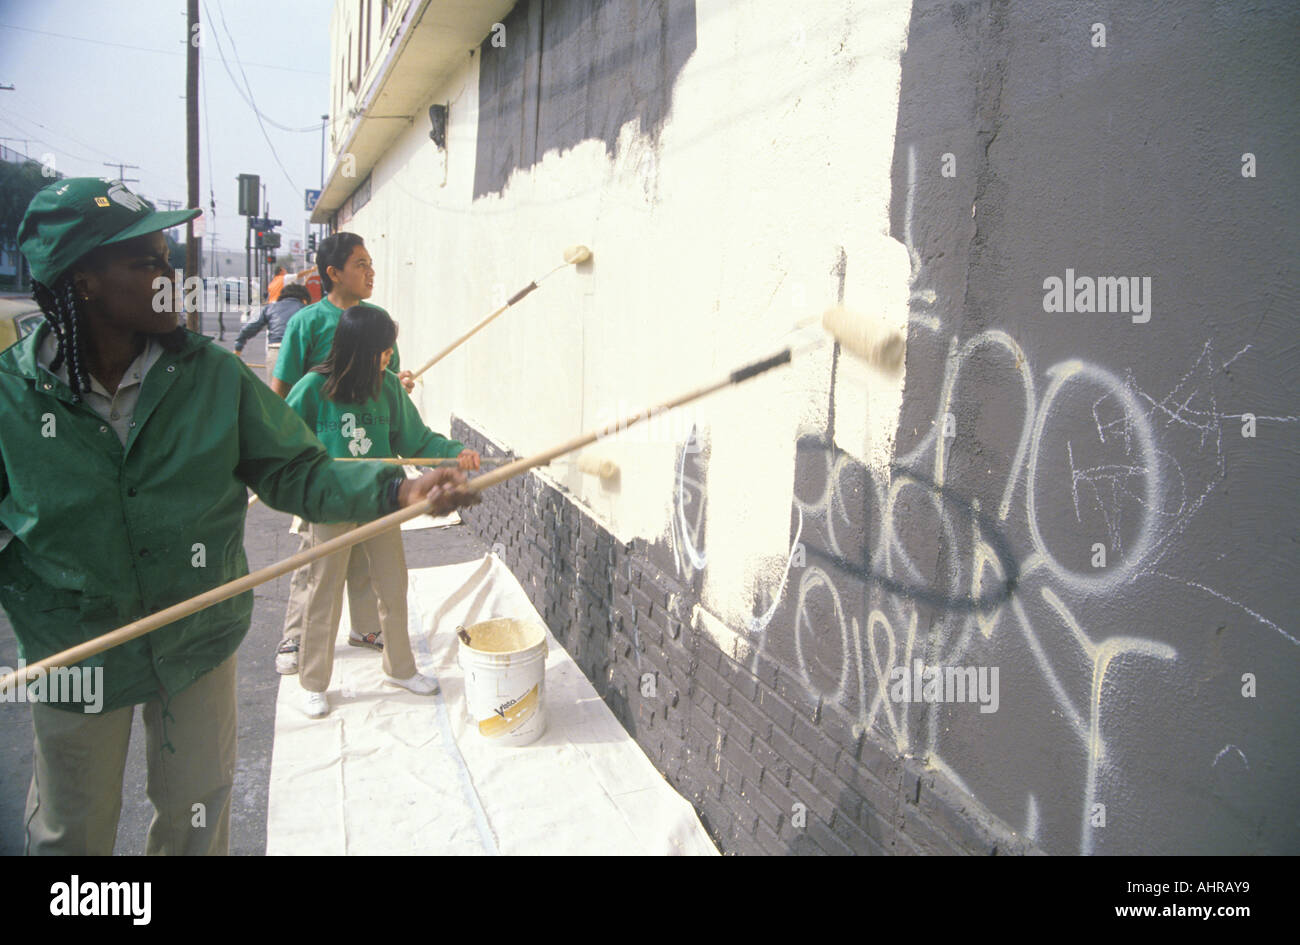 A group of kids repainting the side of a building defaced by graffiti Stock Photo